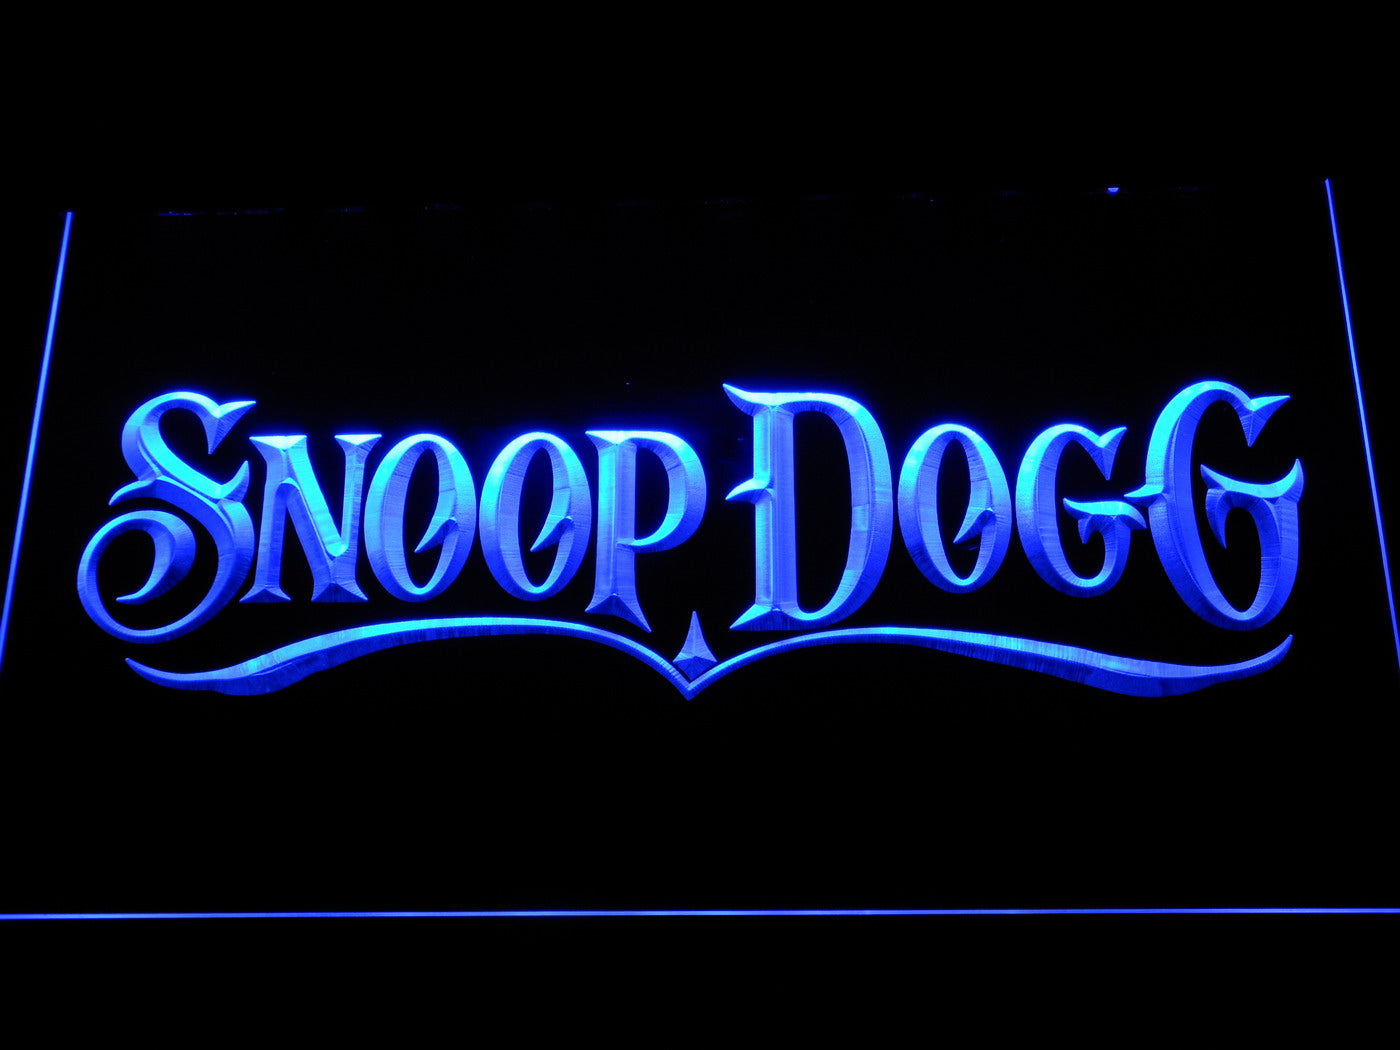 Snoop Dogg Rapper LED Neon Sign